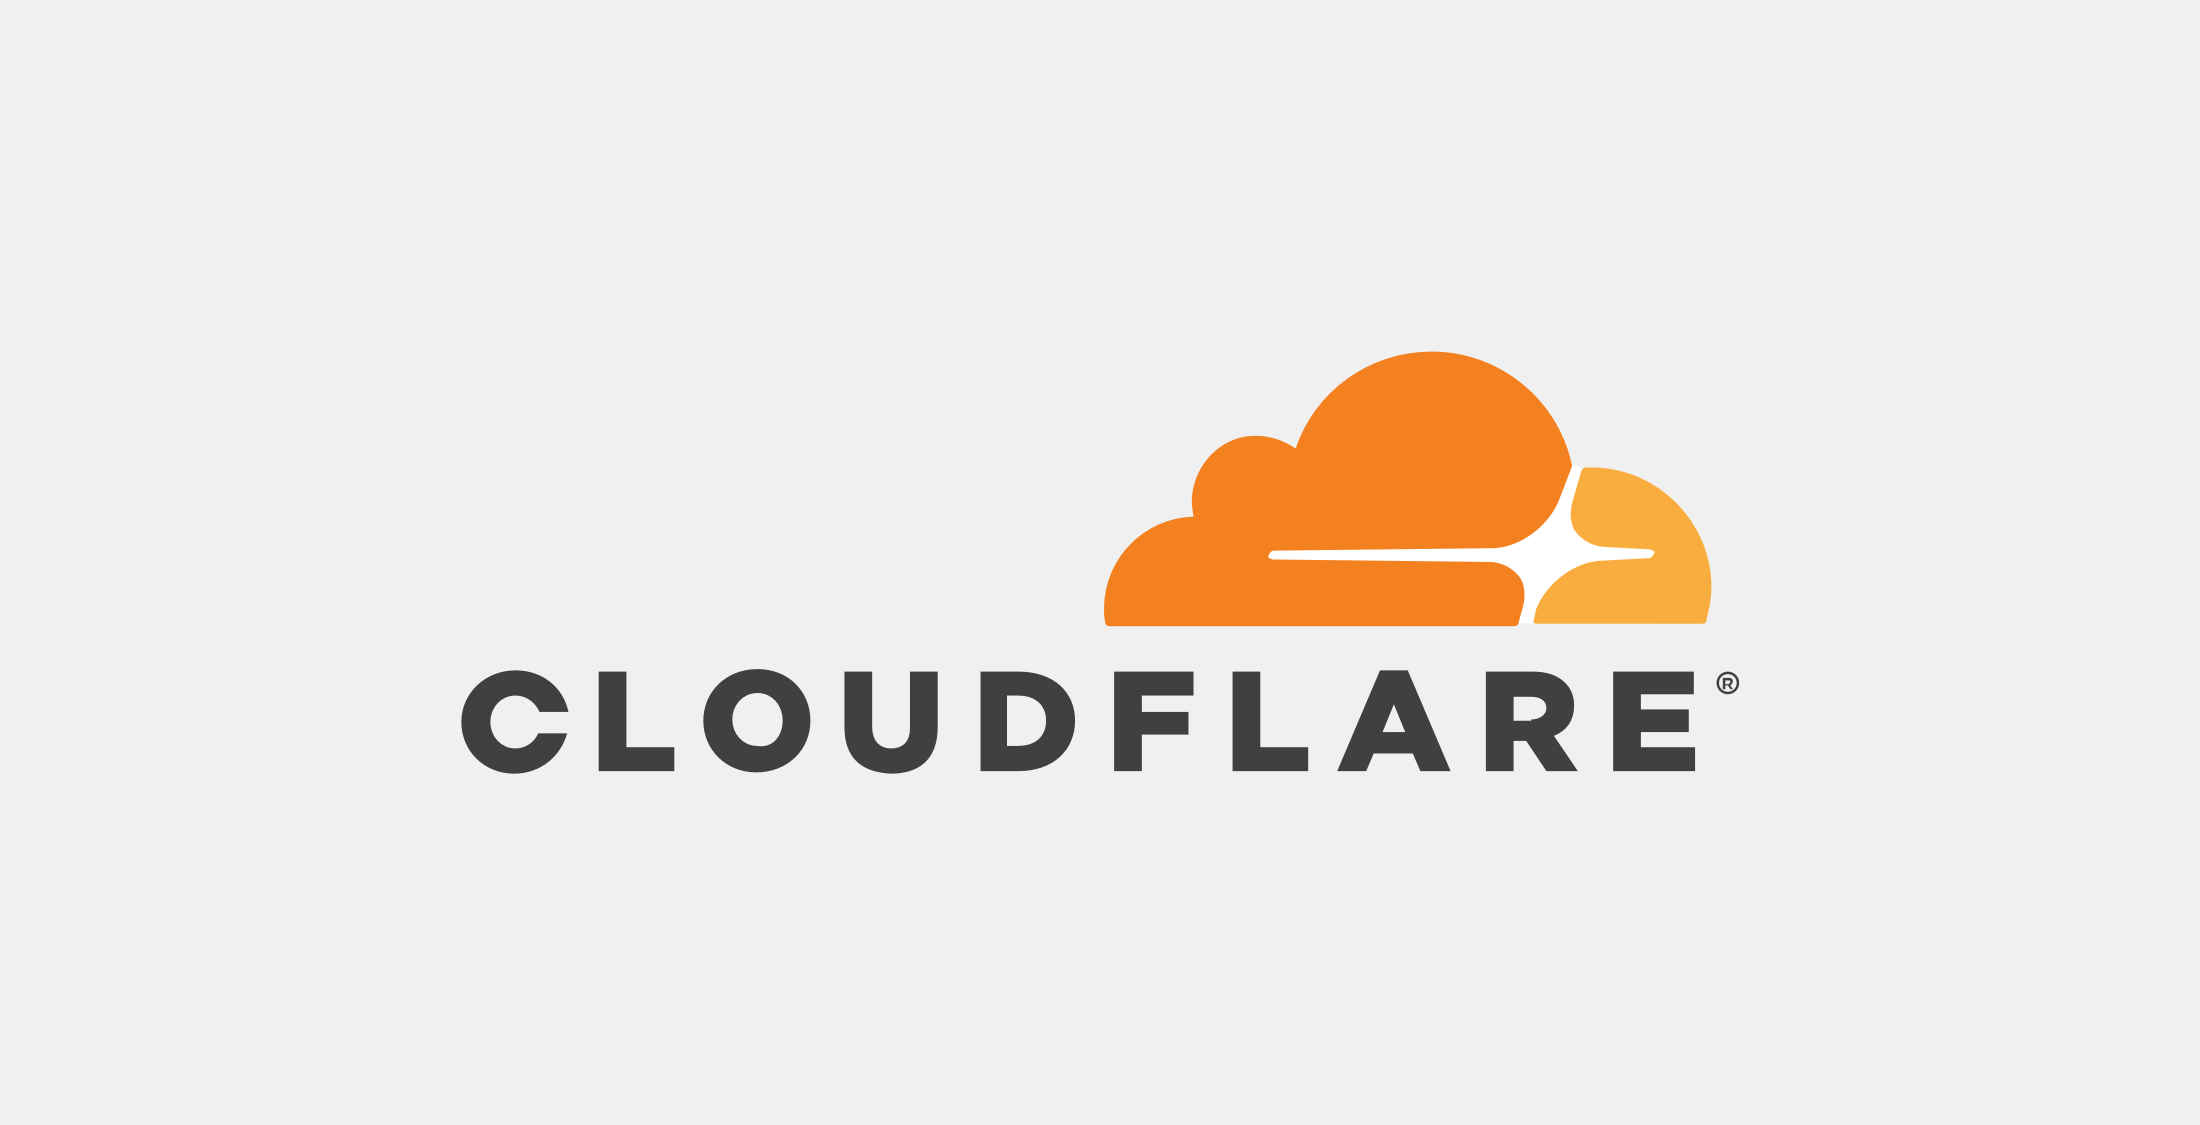 Cloudflare has been leaking custom HTTPS sessions image